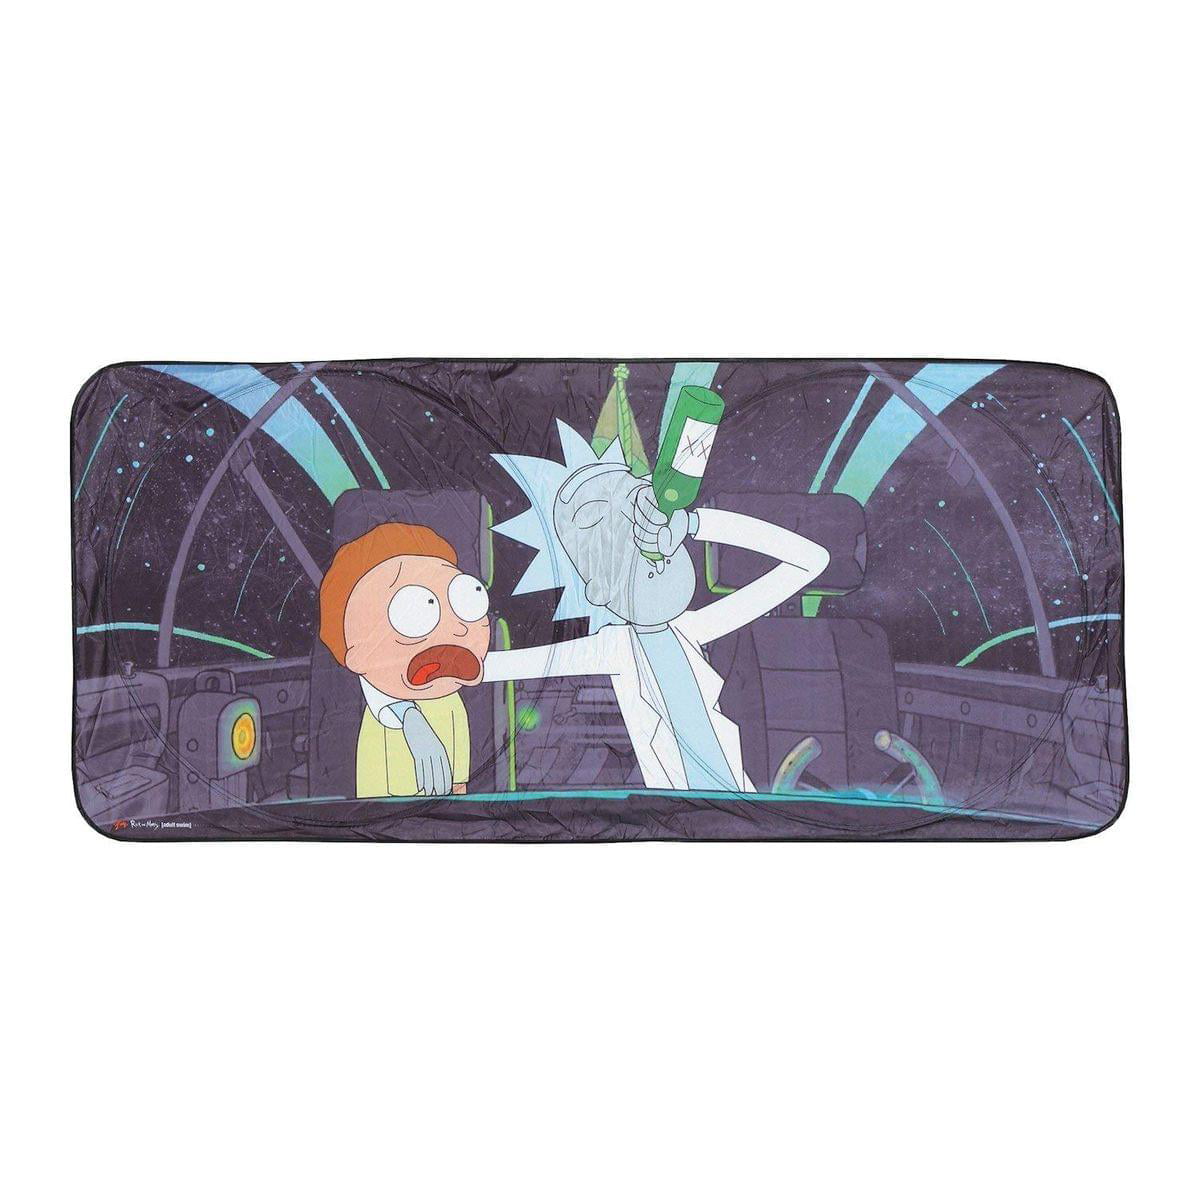 Rick and Morty Accessories Just Funky Rick and Morty Run the Jewels Accordion Auto Sunshade 